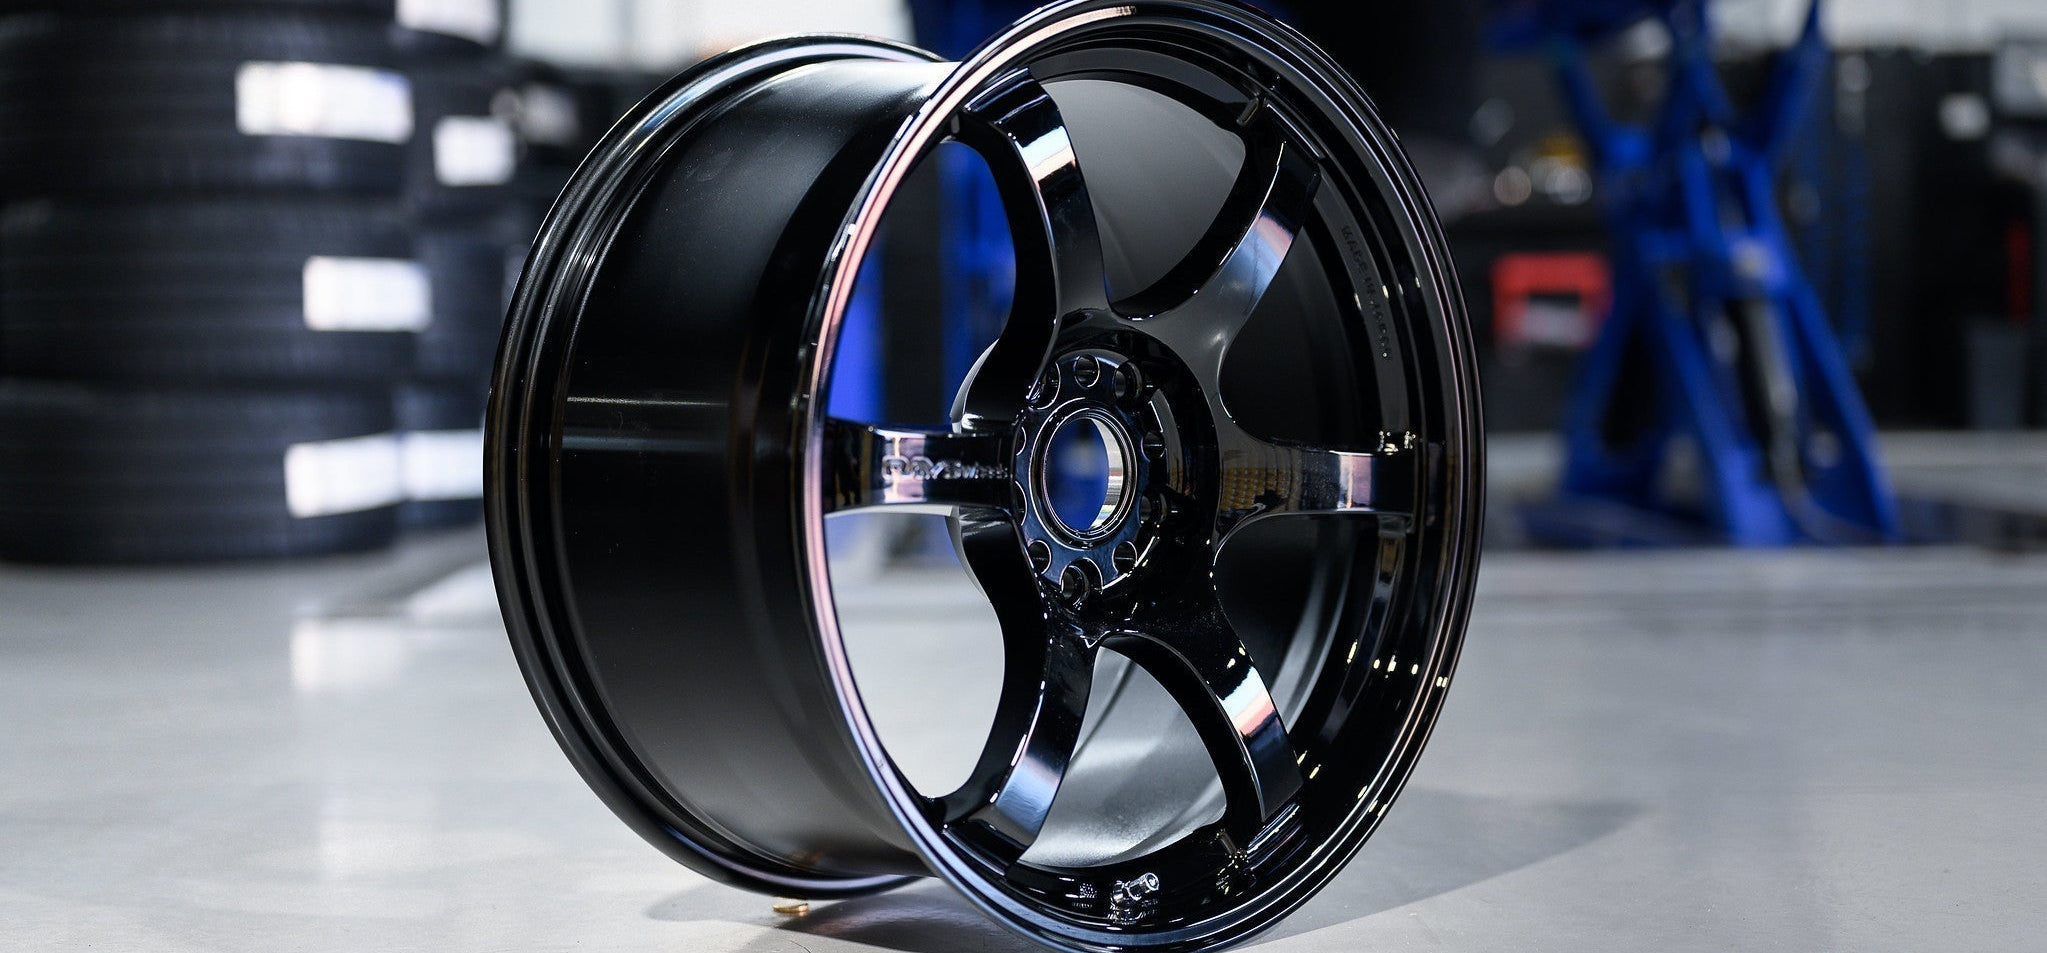 gramLIGHTS 57DR 18" - Premium Wheels from Gram Lights - From just $2190! Shop now at MK MOTORSPORTS